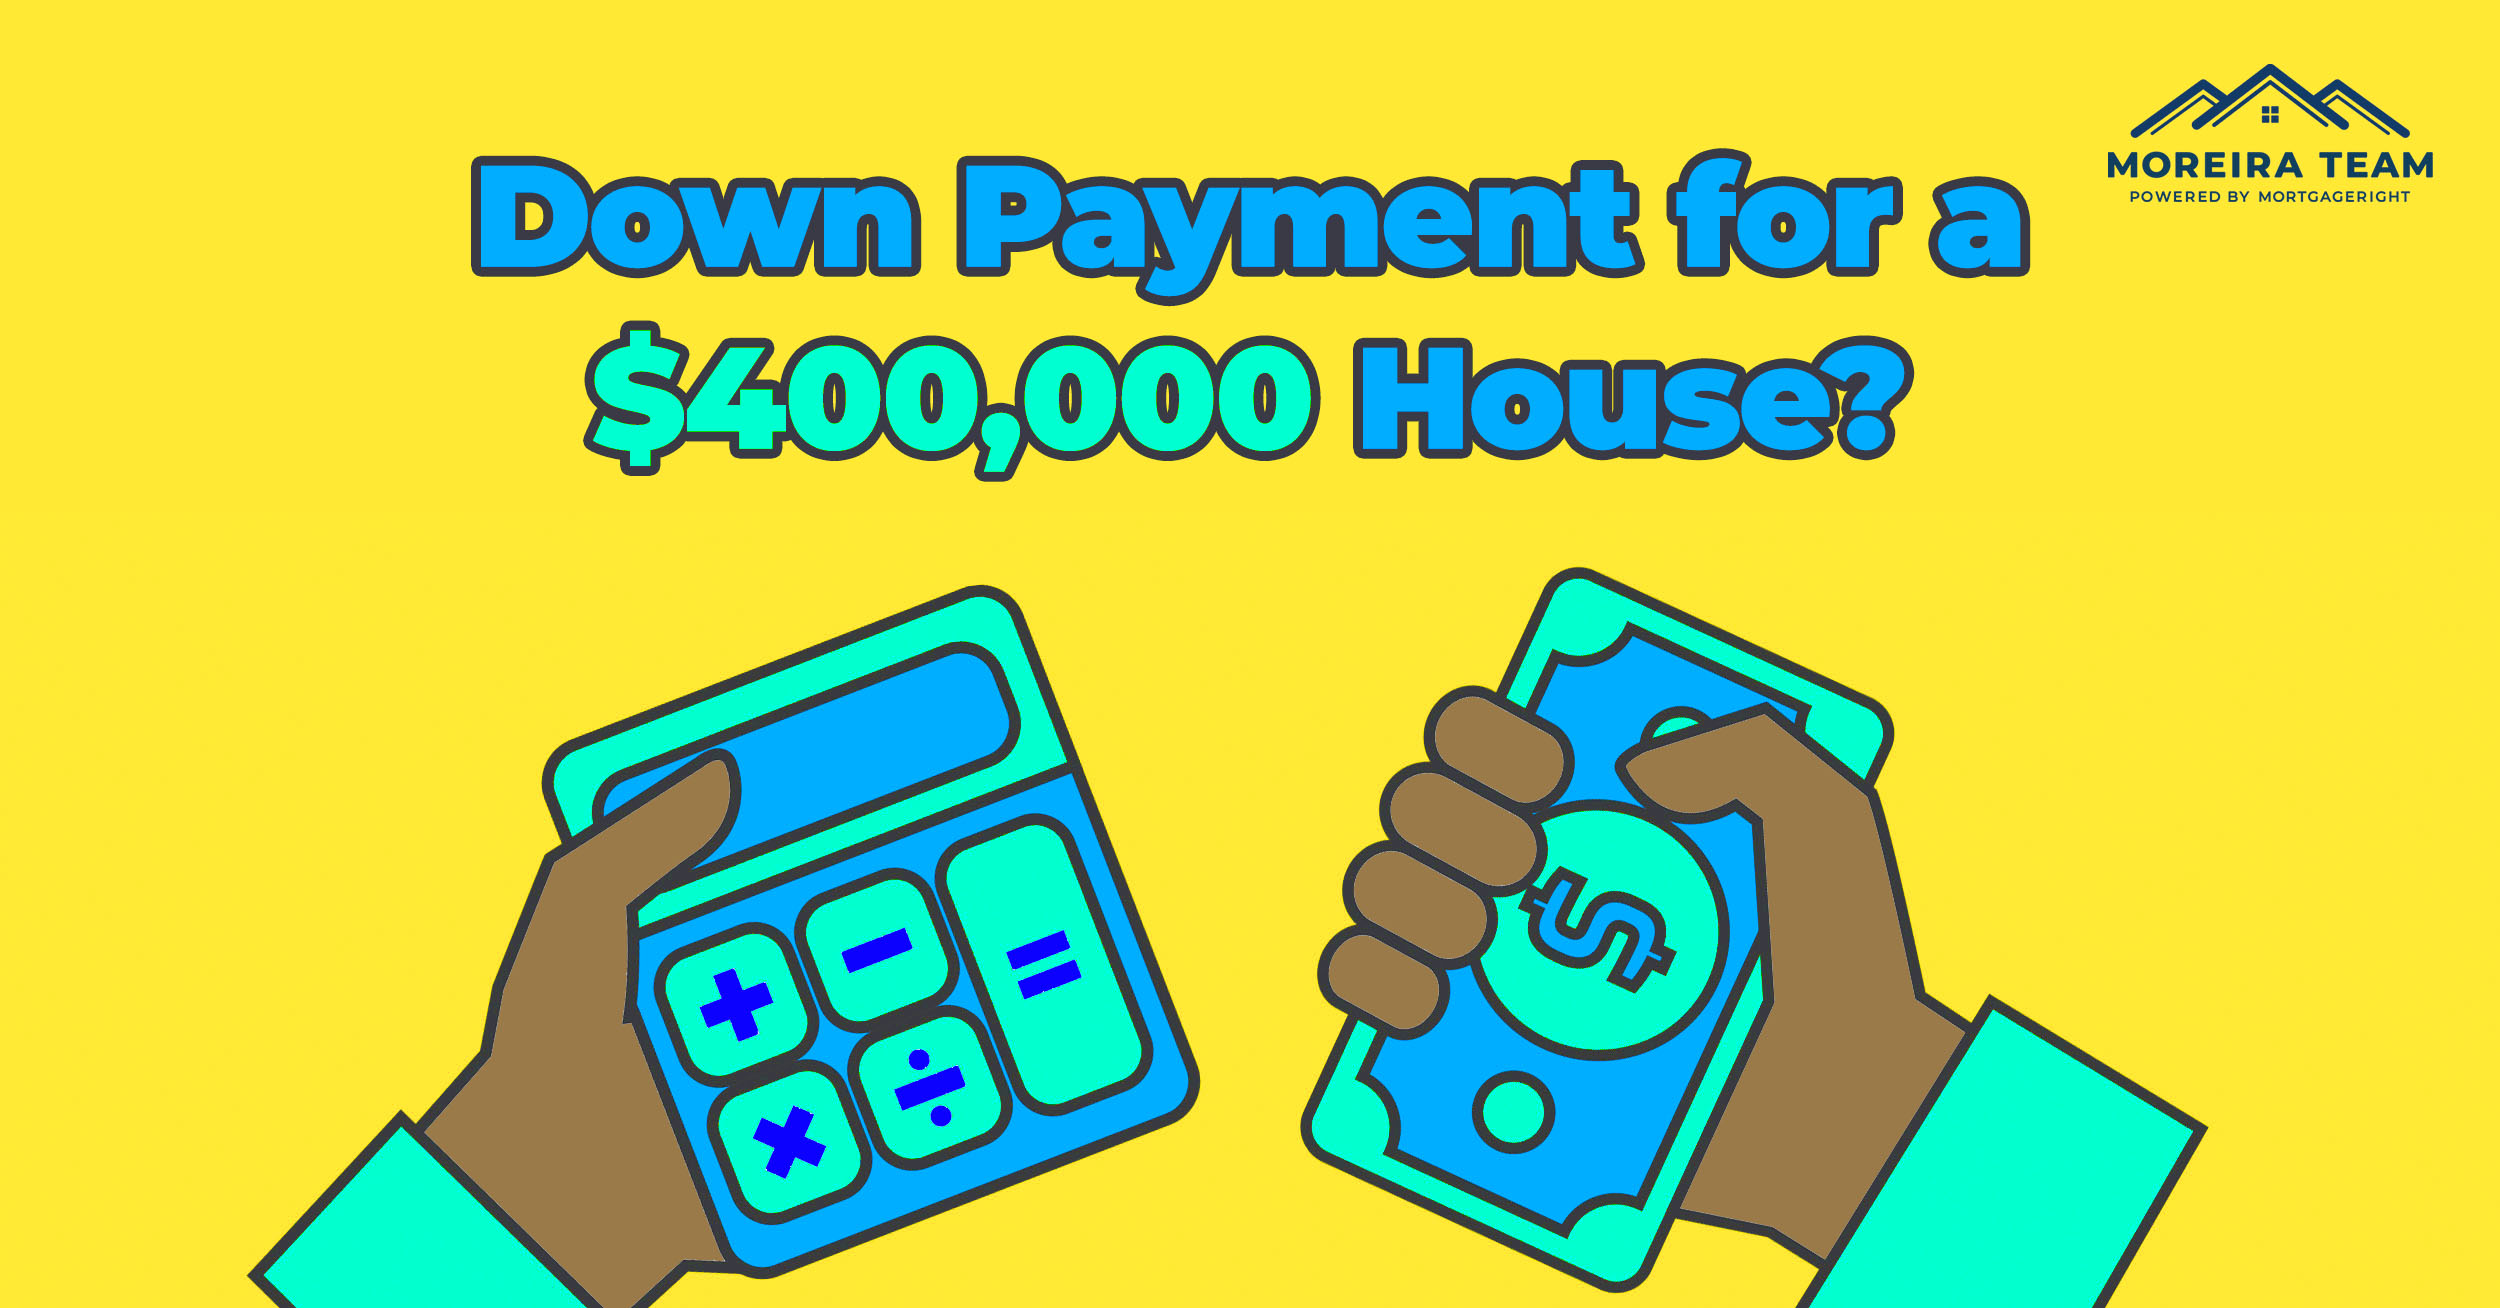 How Much is the Down Payment for a $400,000 Home?